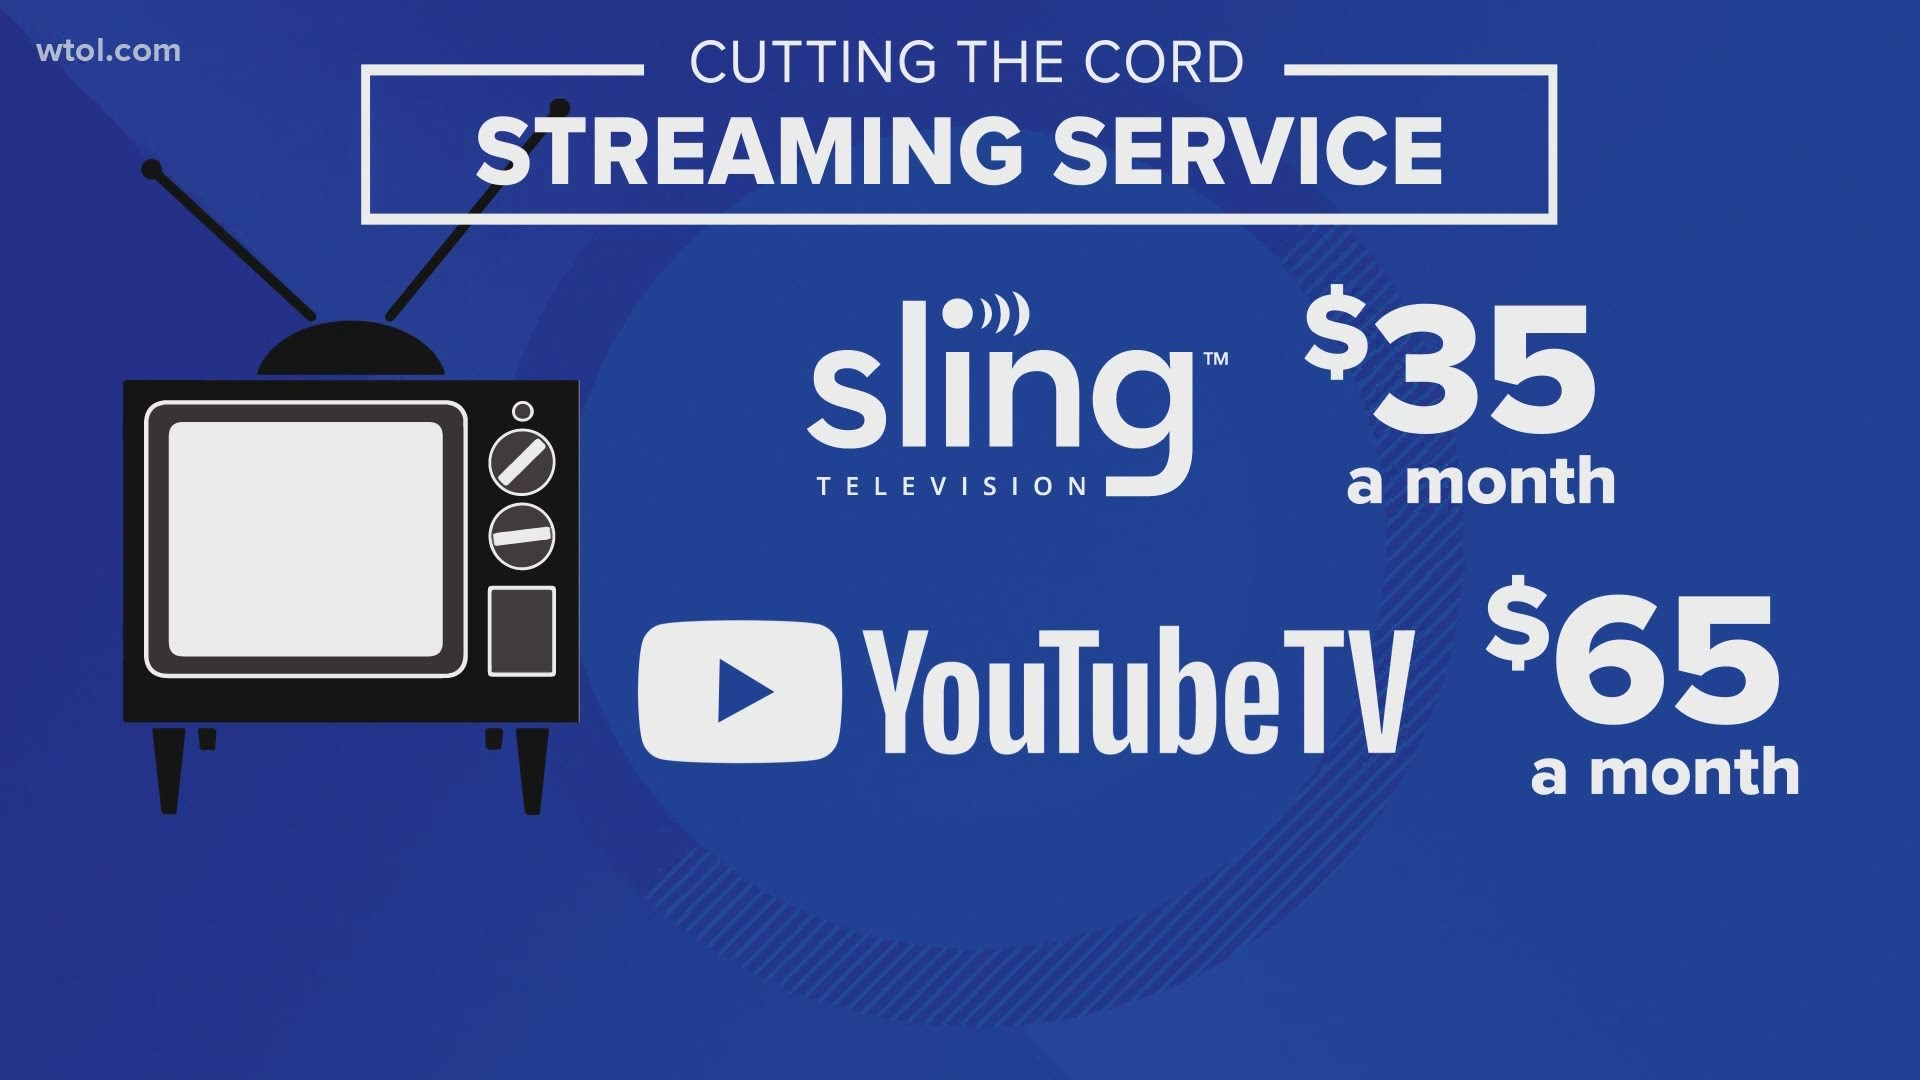 In the digital age, options are plentiful for cable alternatives. Some offer just what you want for a much better deal than ones that offer a lot of what you don't.